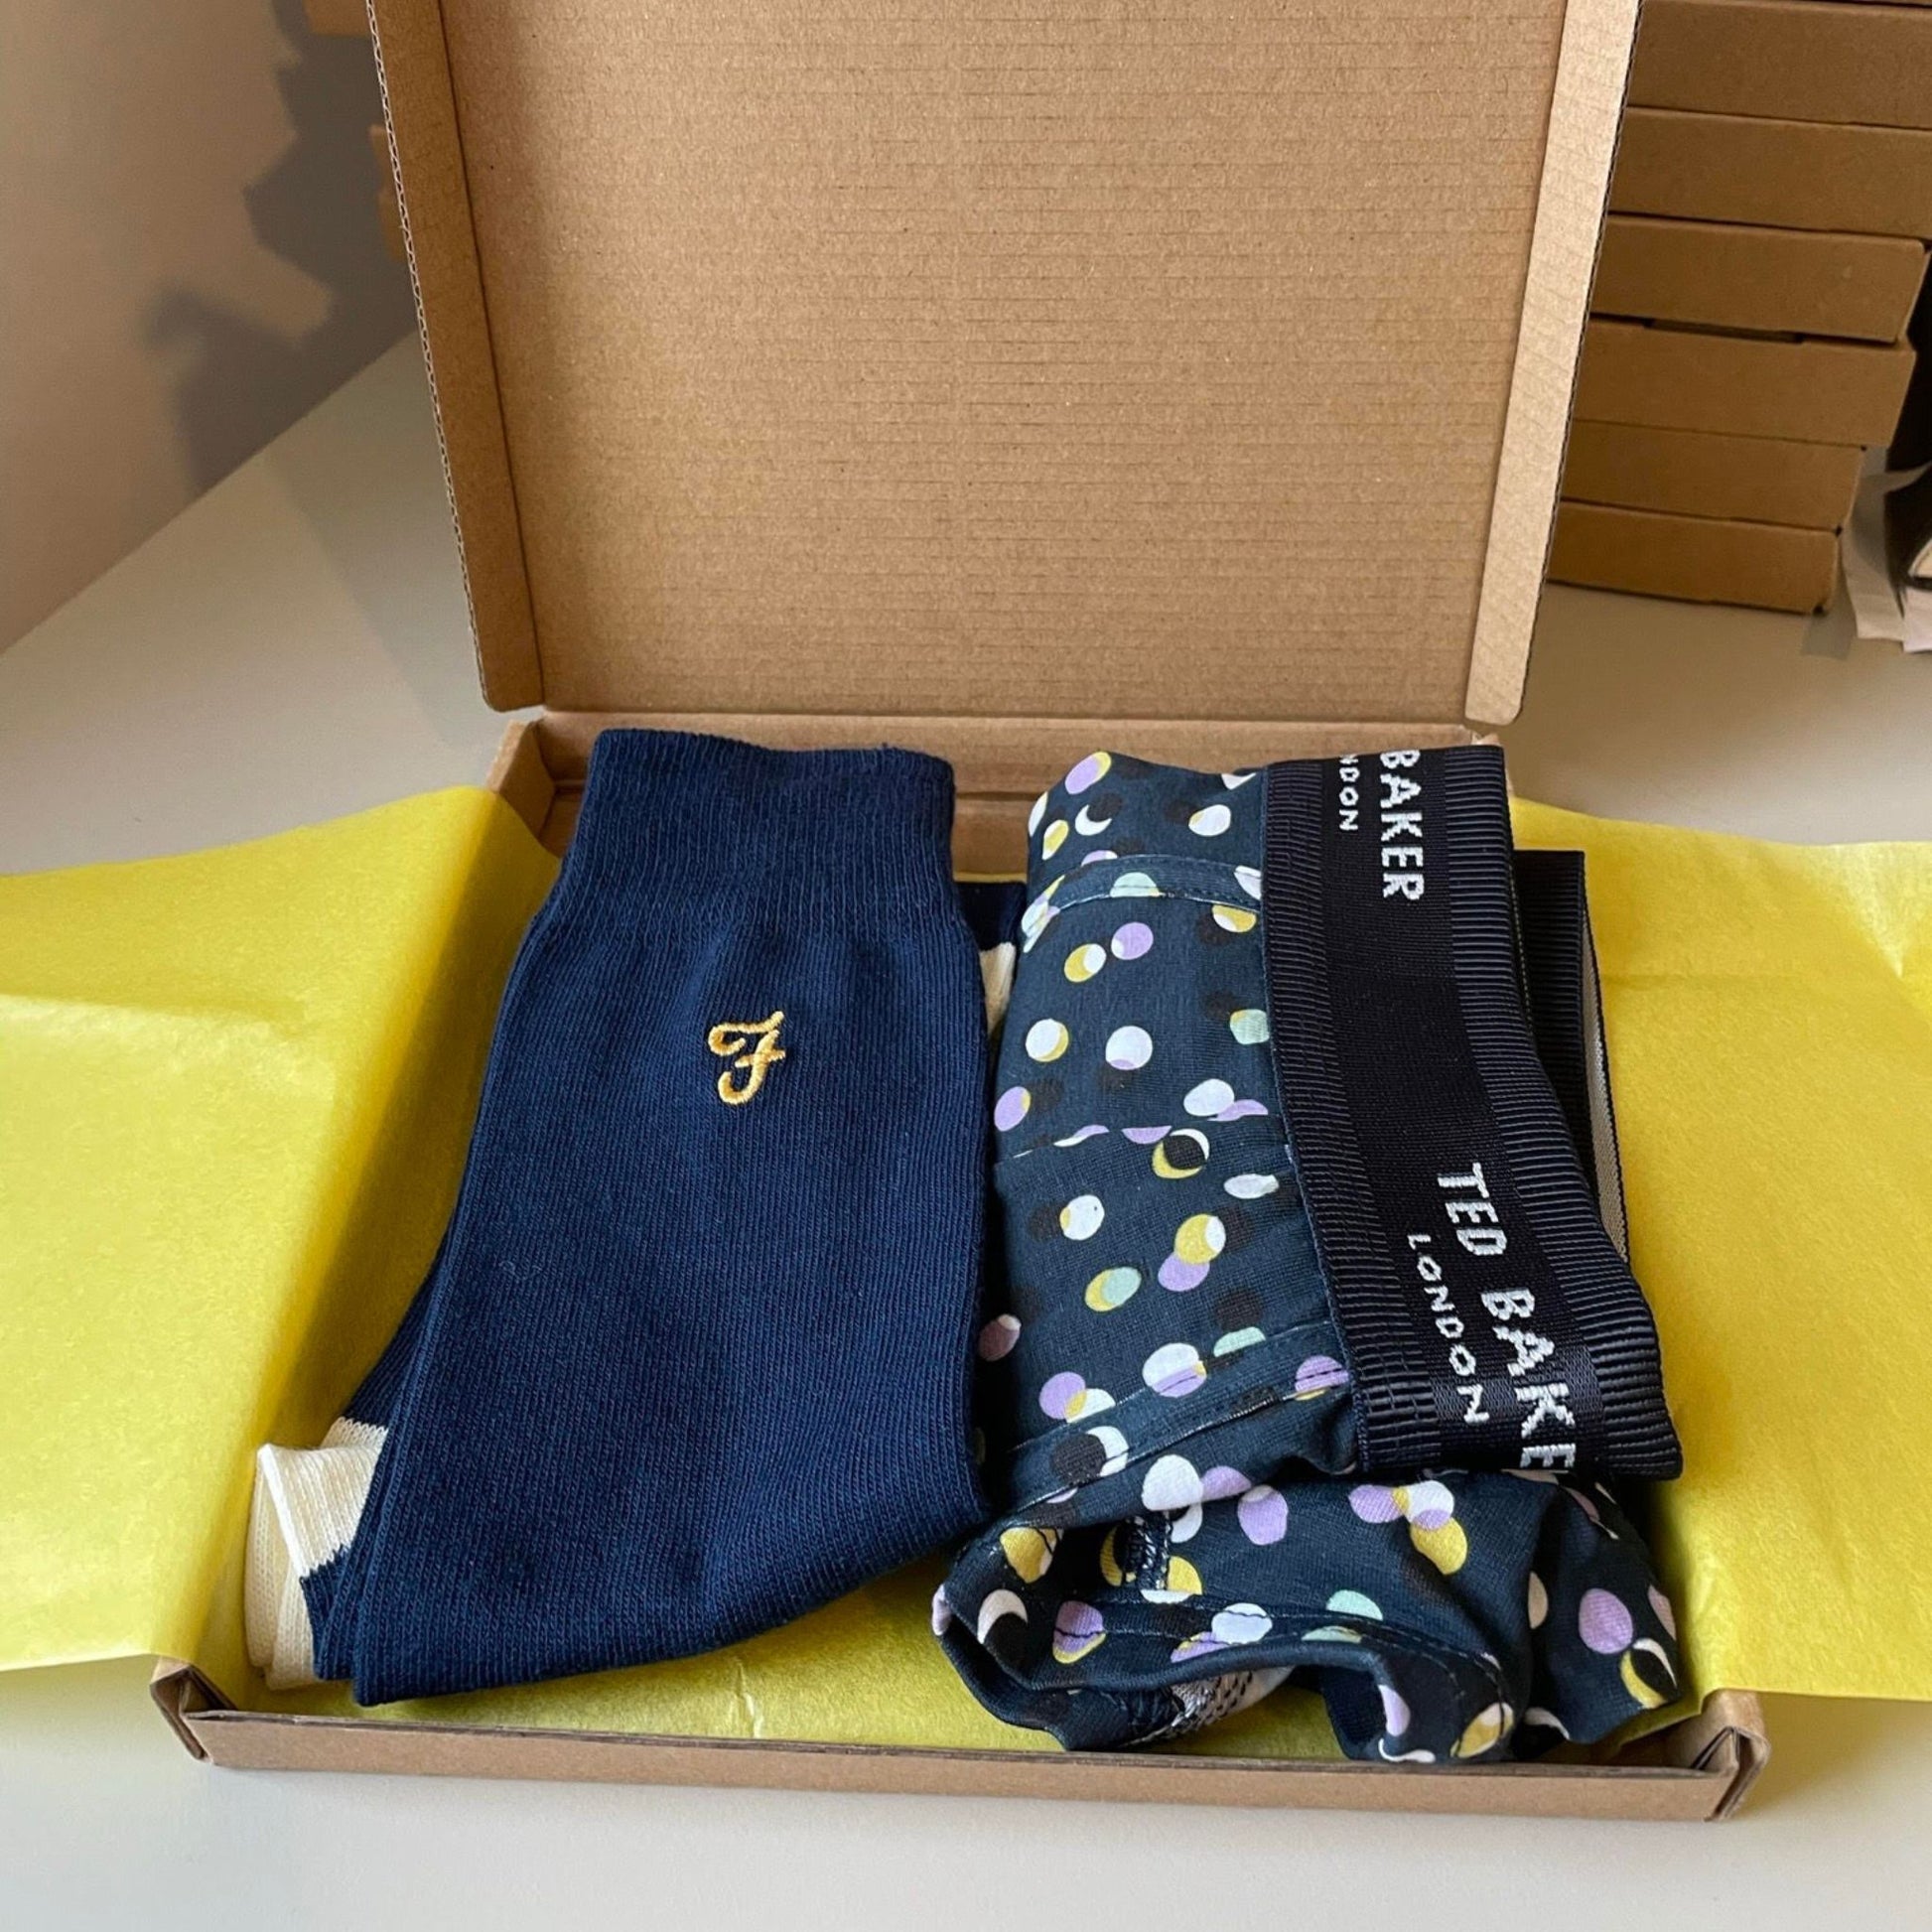 Six Month Letterbox Jox Socks and Boxers Subscription Box